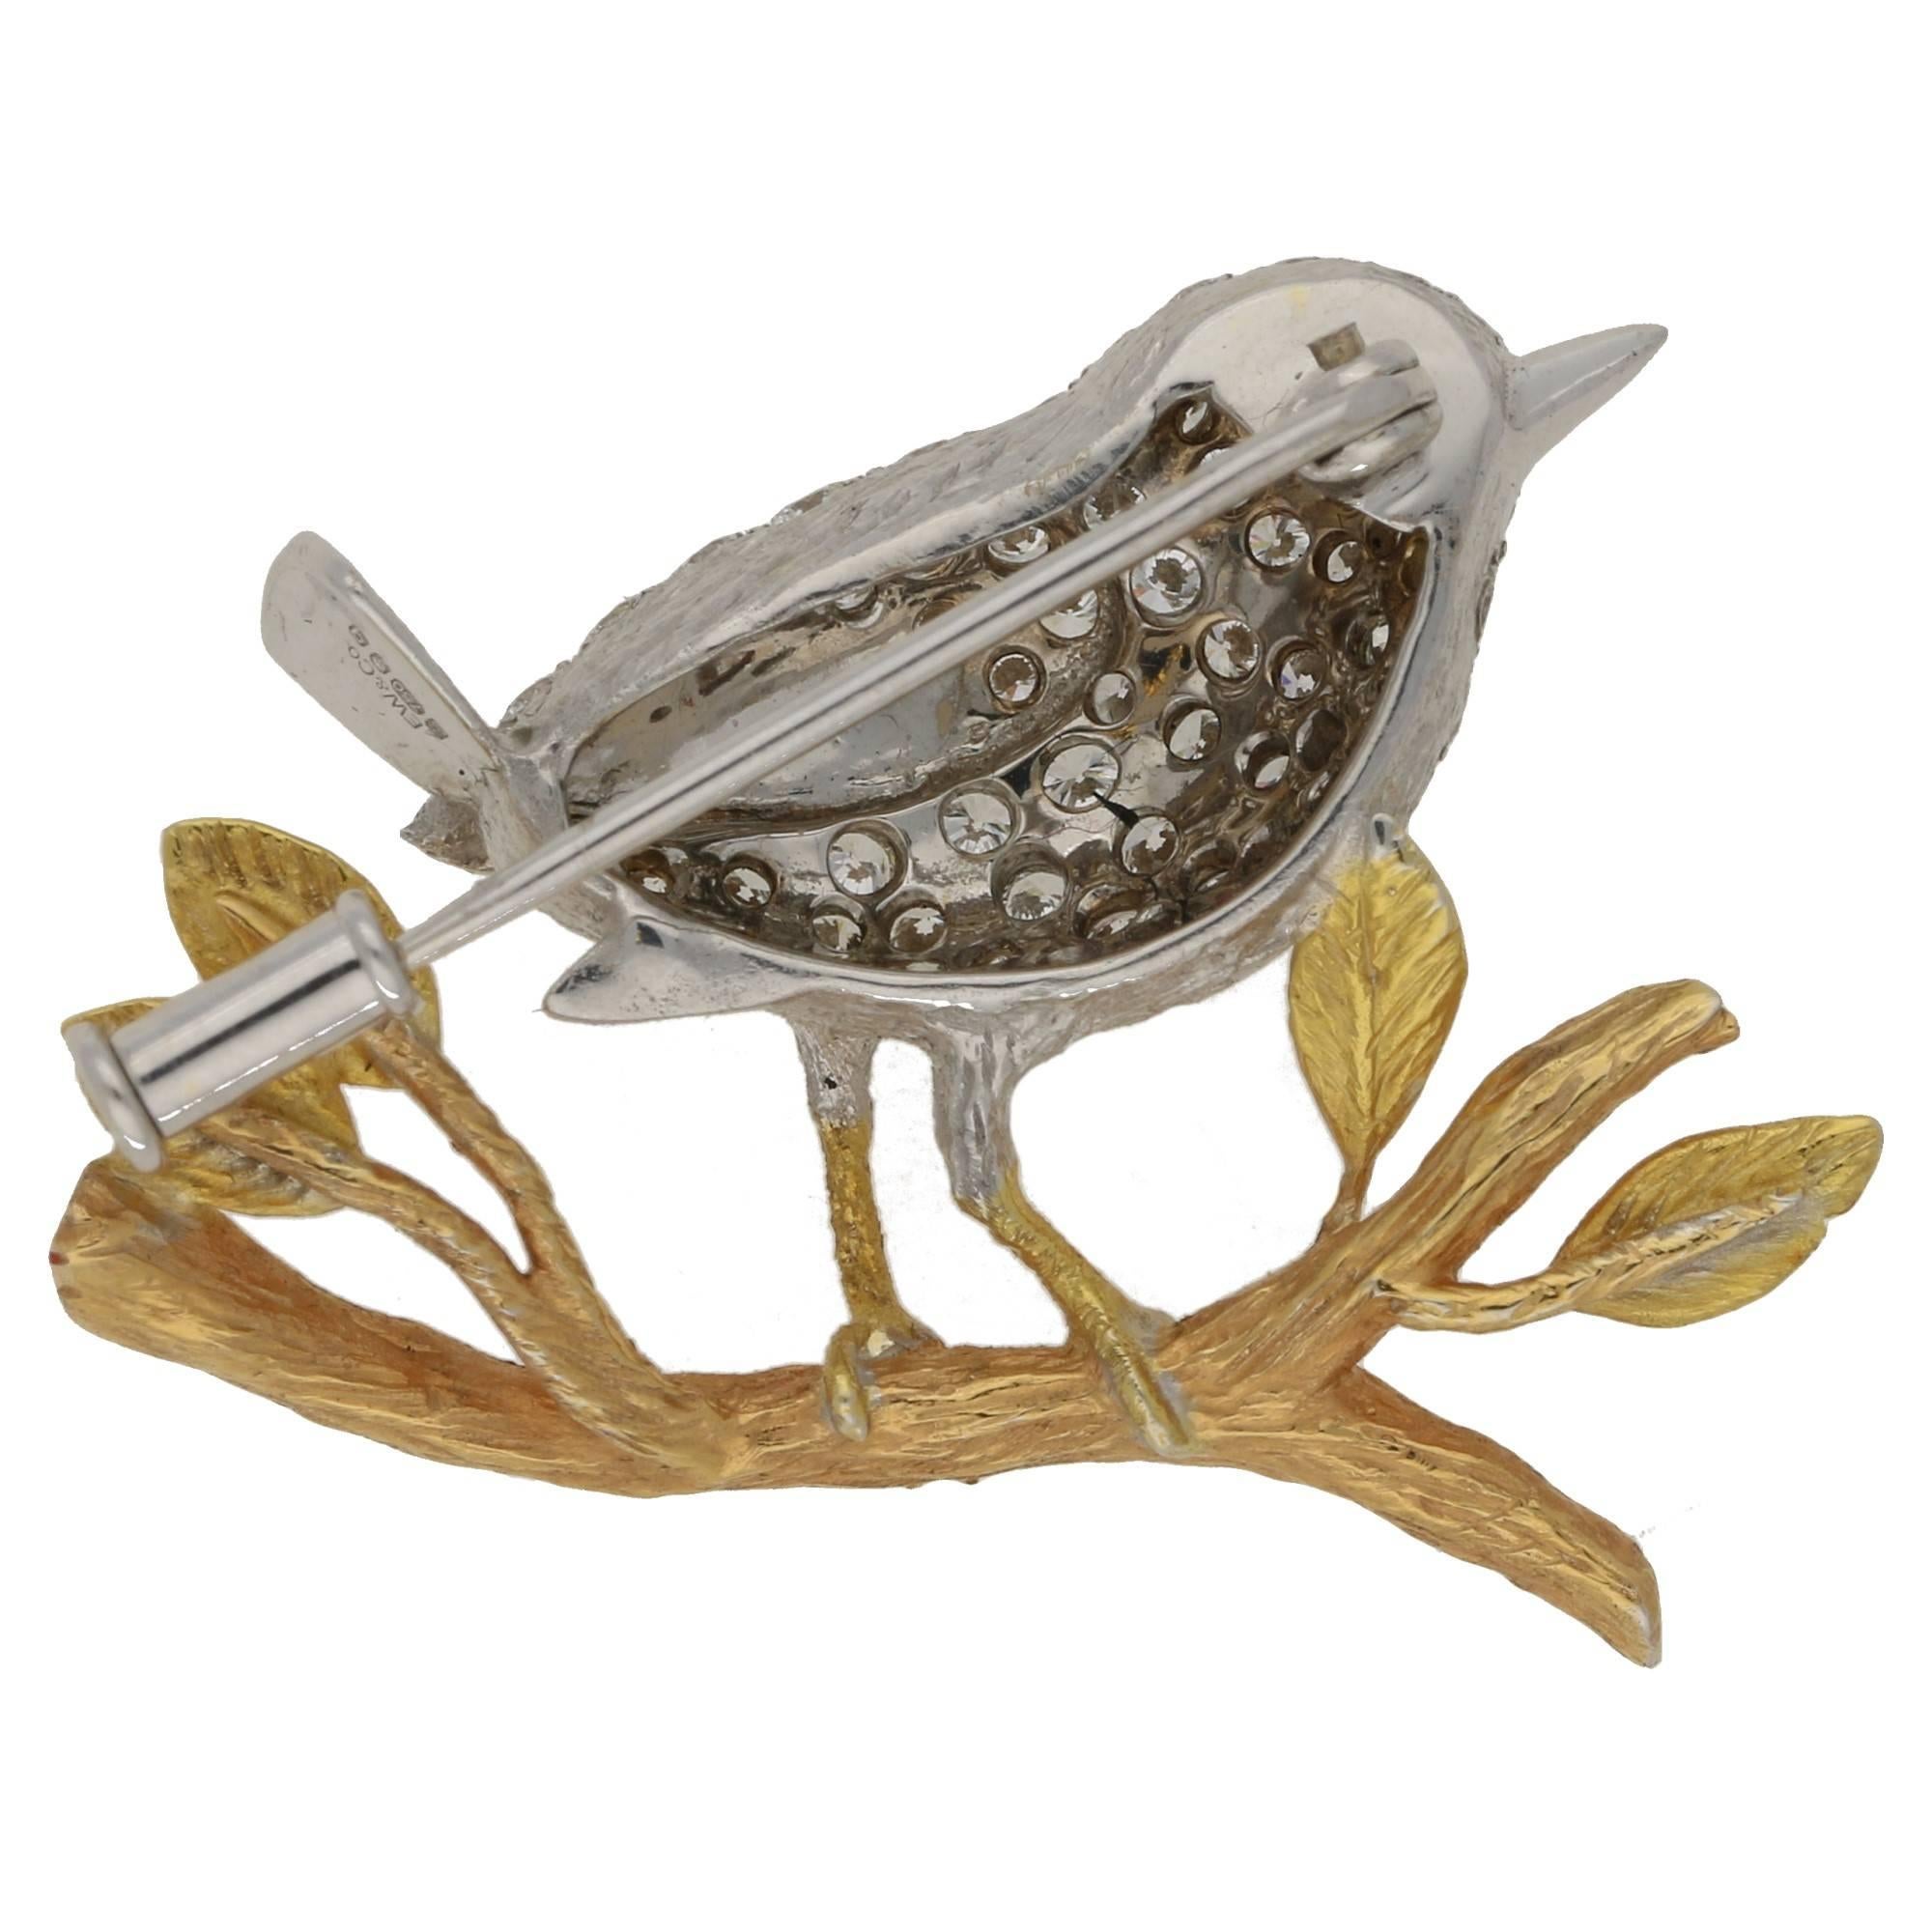 A modern diamond set brooch depicting a wren on a branch, beautifully detailed. This brooch is set with approximately 1.2cts diamond, colour: F-G, clarity: VS. In 18ct white and yellow gold, carrying full hallmarks.